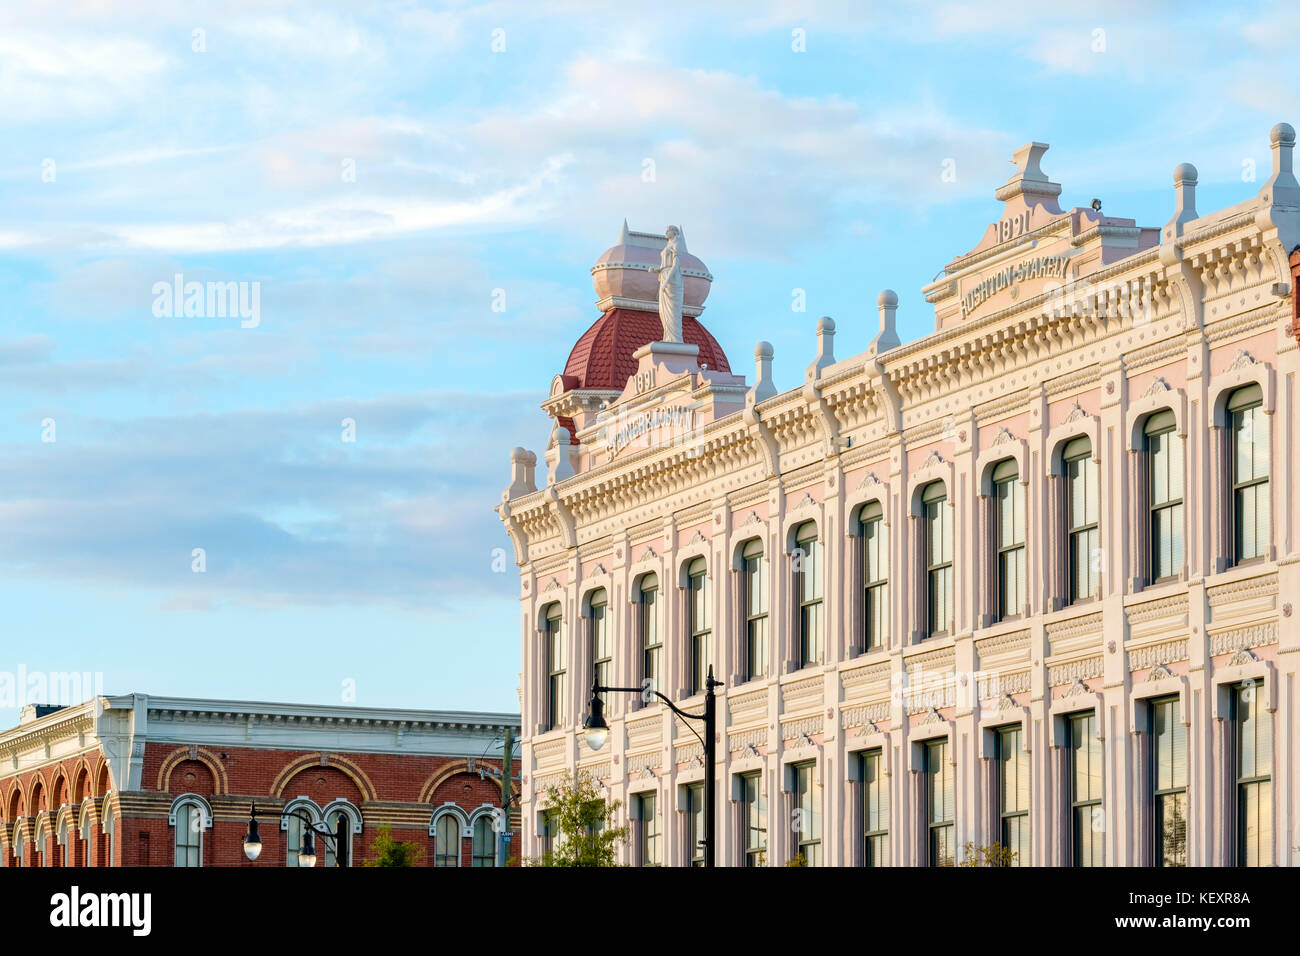 United States, Alabama, Montgomery. Steiner-Lobman Building at the corner of Commerce and Tallapoosa Street, historic downtown. Stock Photo